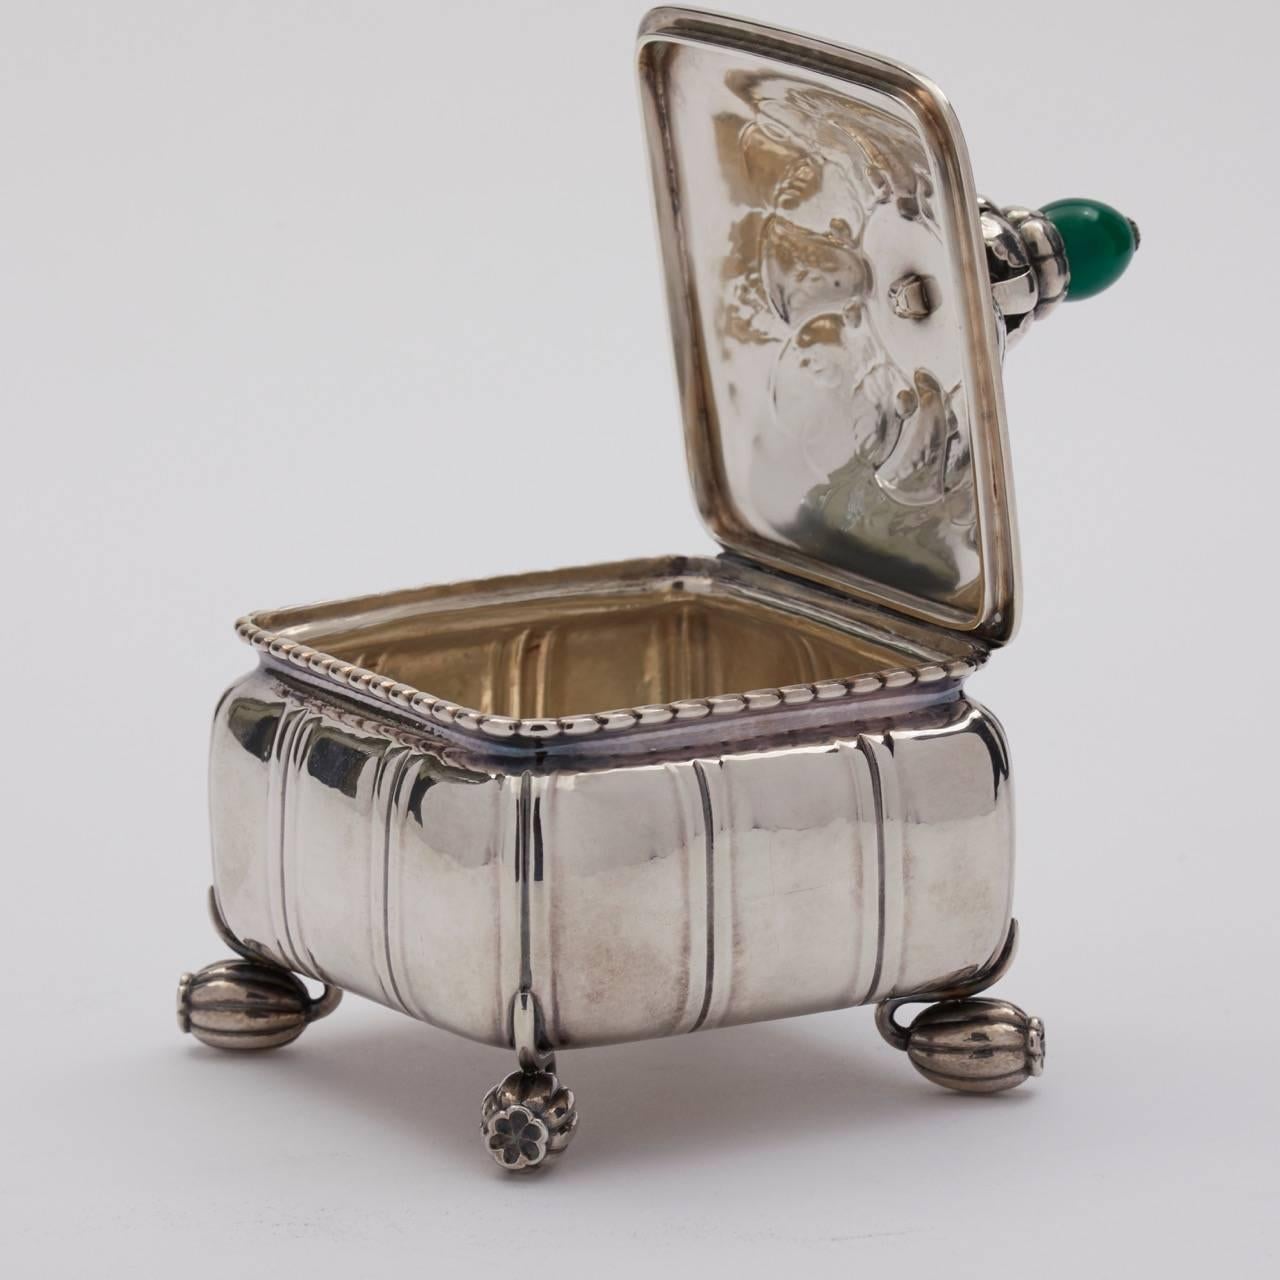 Georg Jensen sterling silver keepsake box, no. 30B.
Green agate finial.

Designed in 1913.
Exquisite hand-chased foliate details. Citron feet. Hinged lid.

Excellent patina, original condition. 
A similar example can be seen in the book